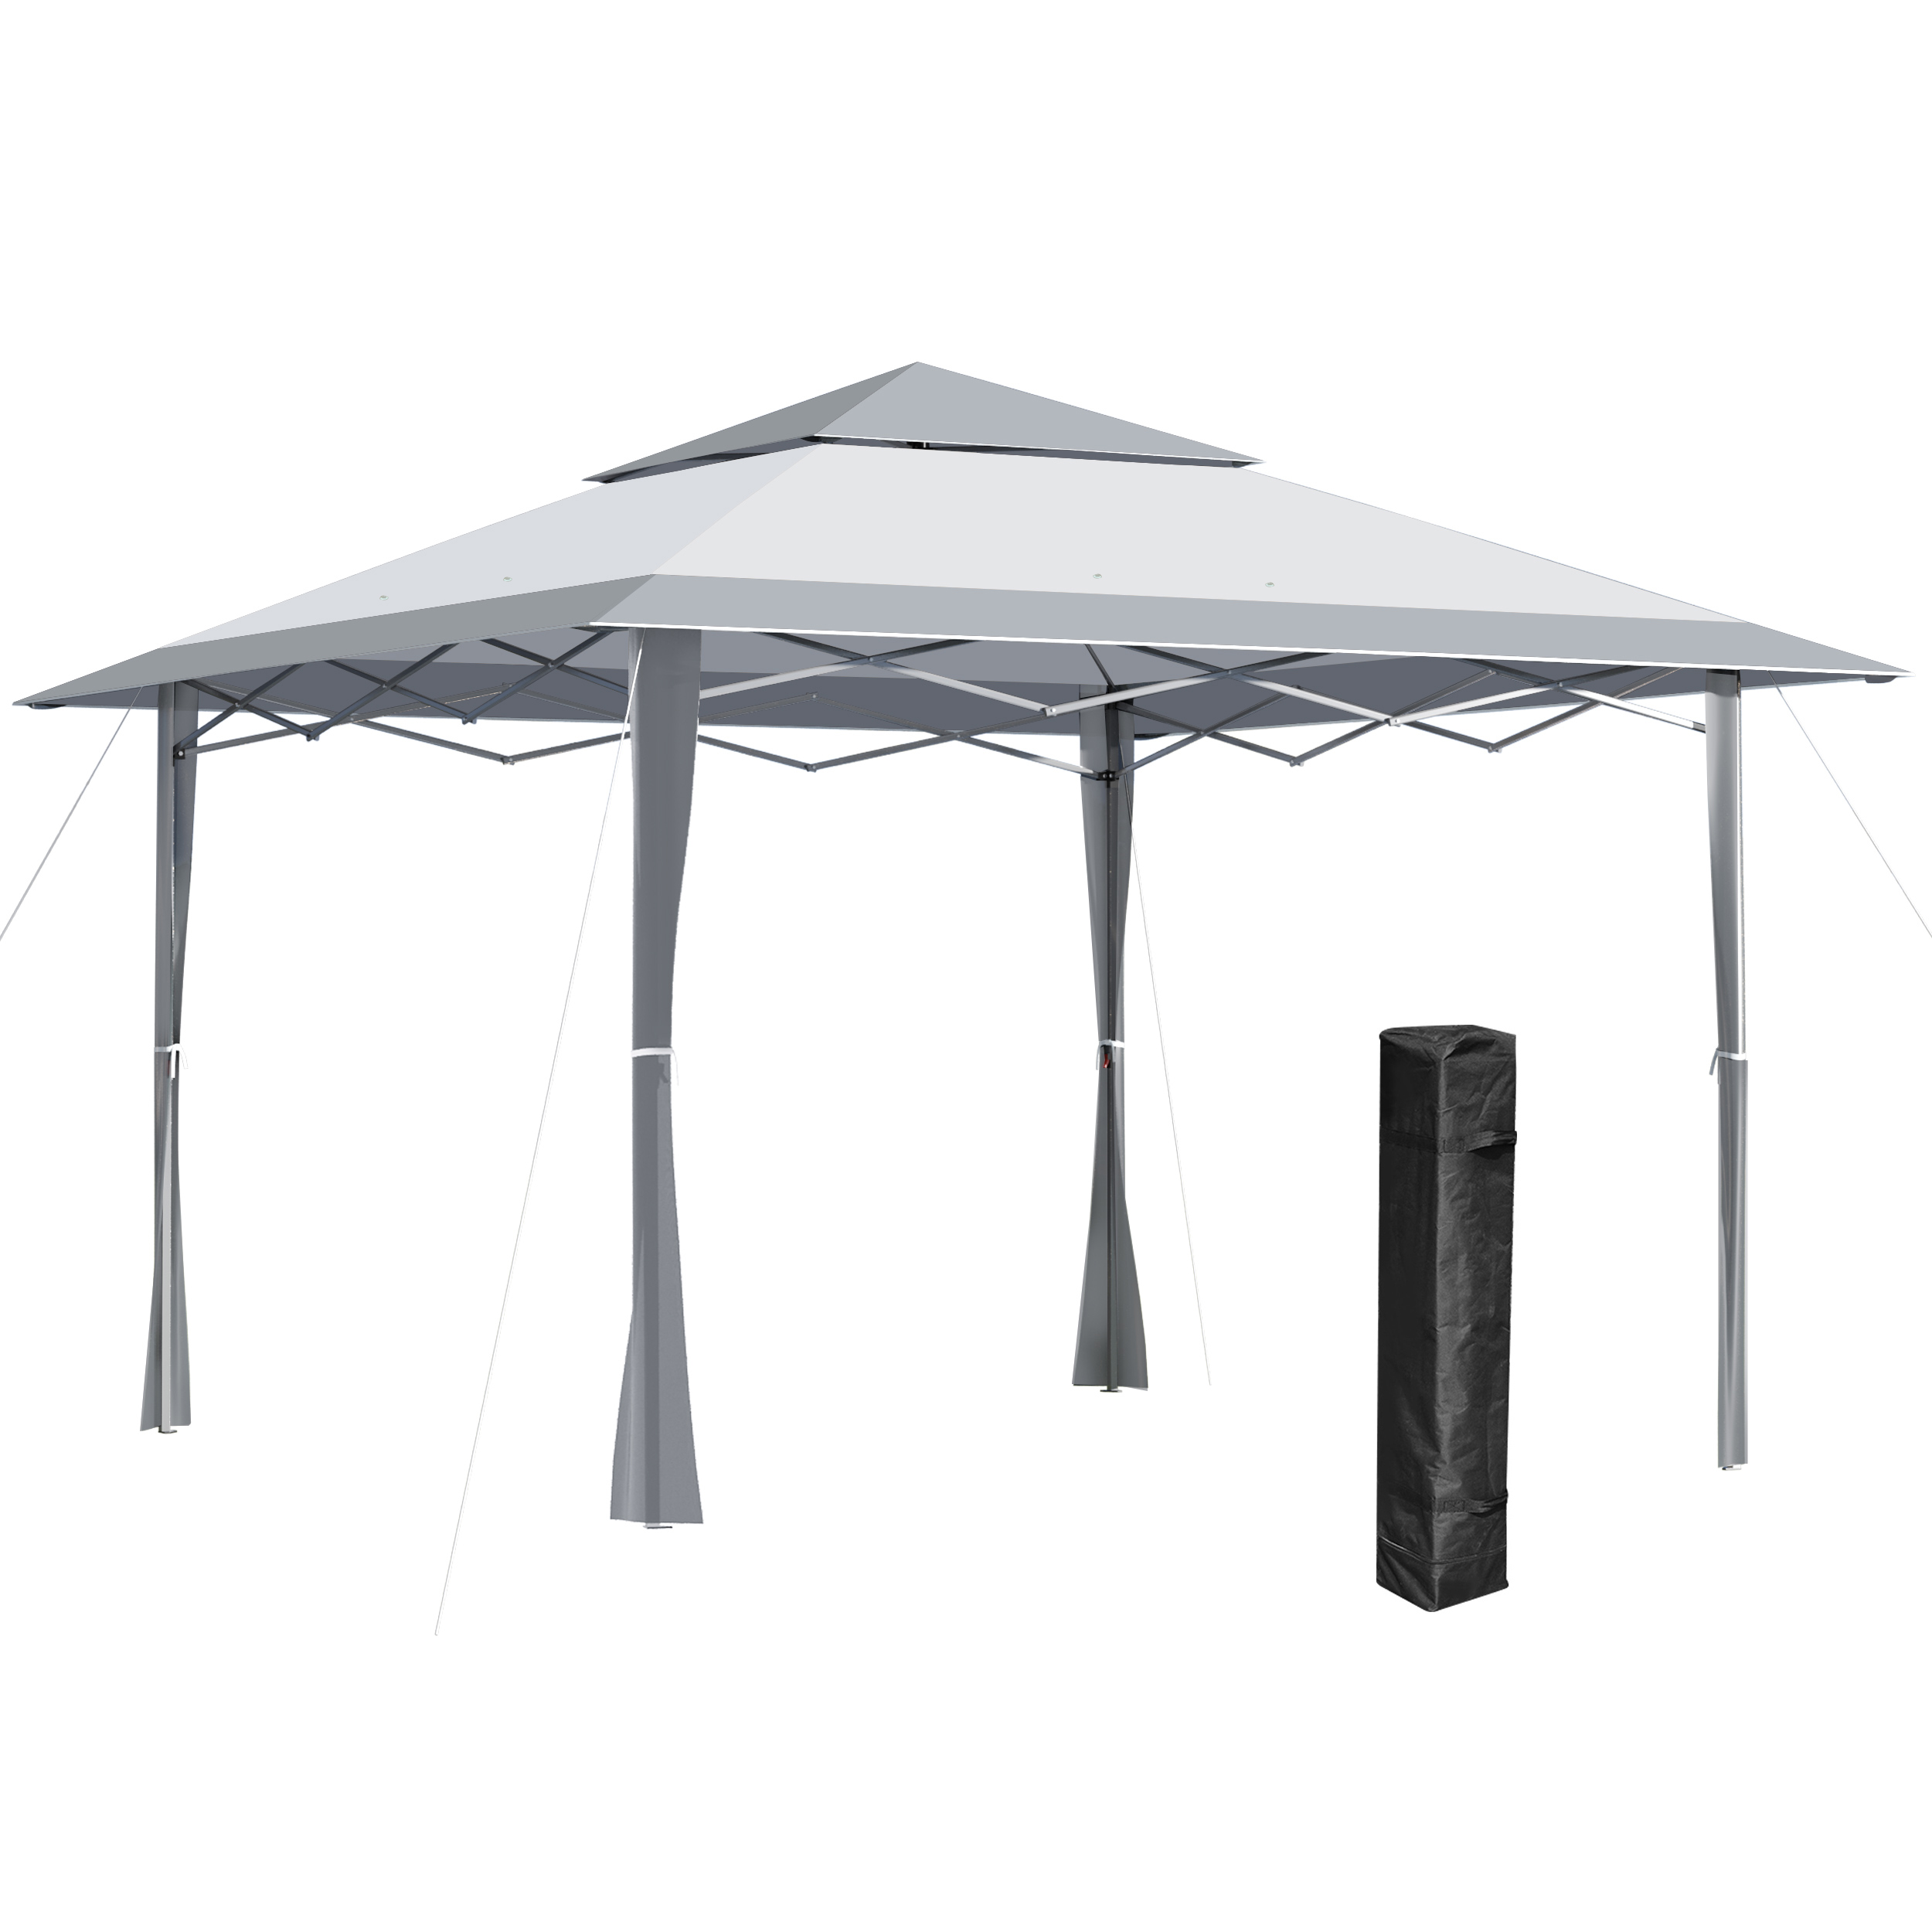 Outsunny Pop-up Canopy Gazebo Tent With Roller Bag & Adjustable Legs Outdoor Party, Steel Frame, 4 X 4m White & Grey